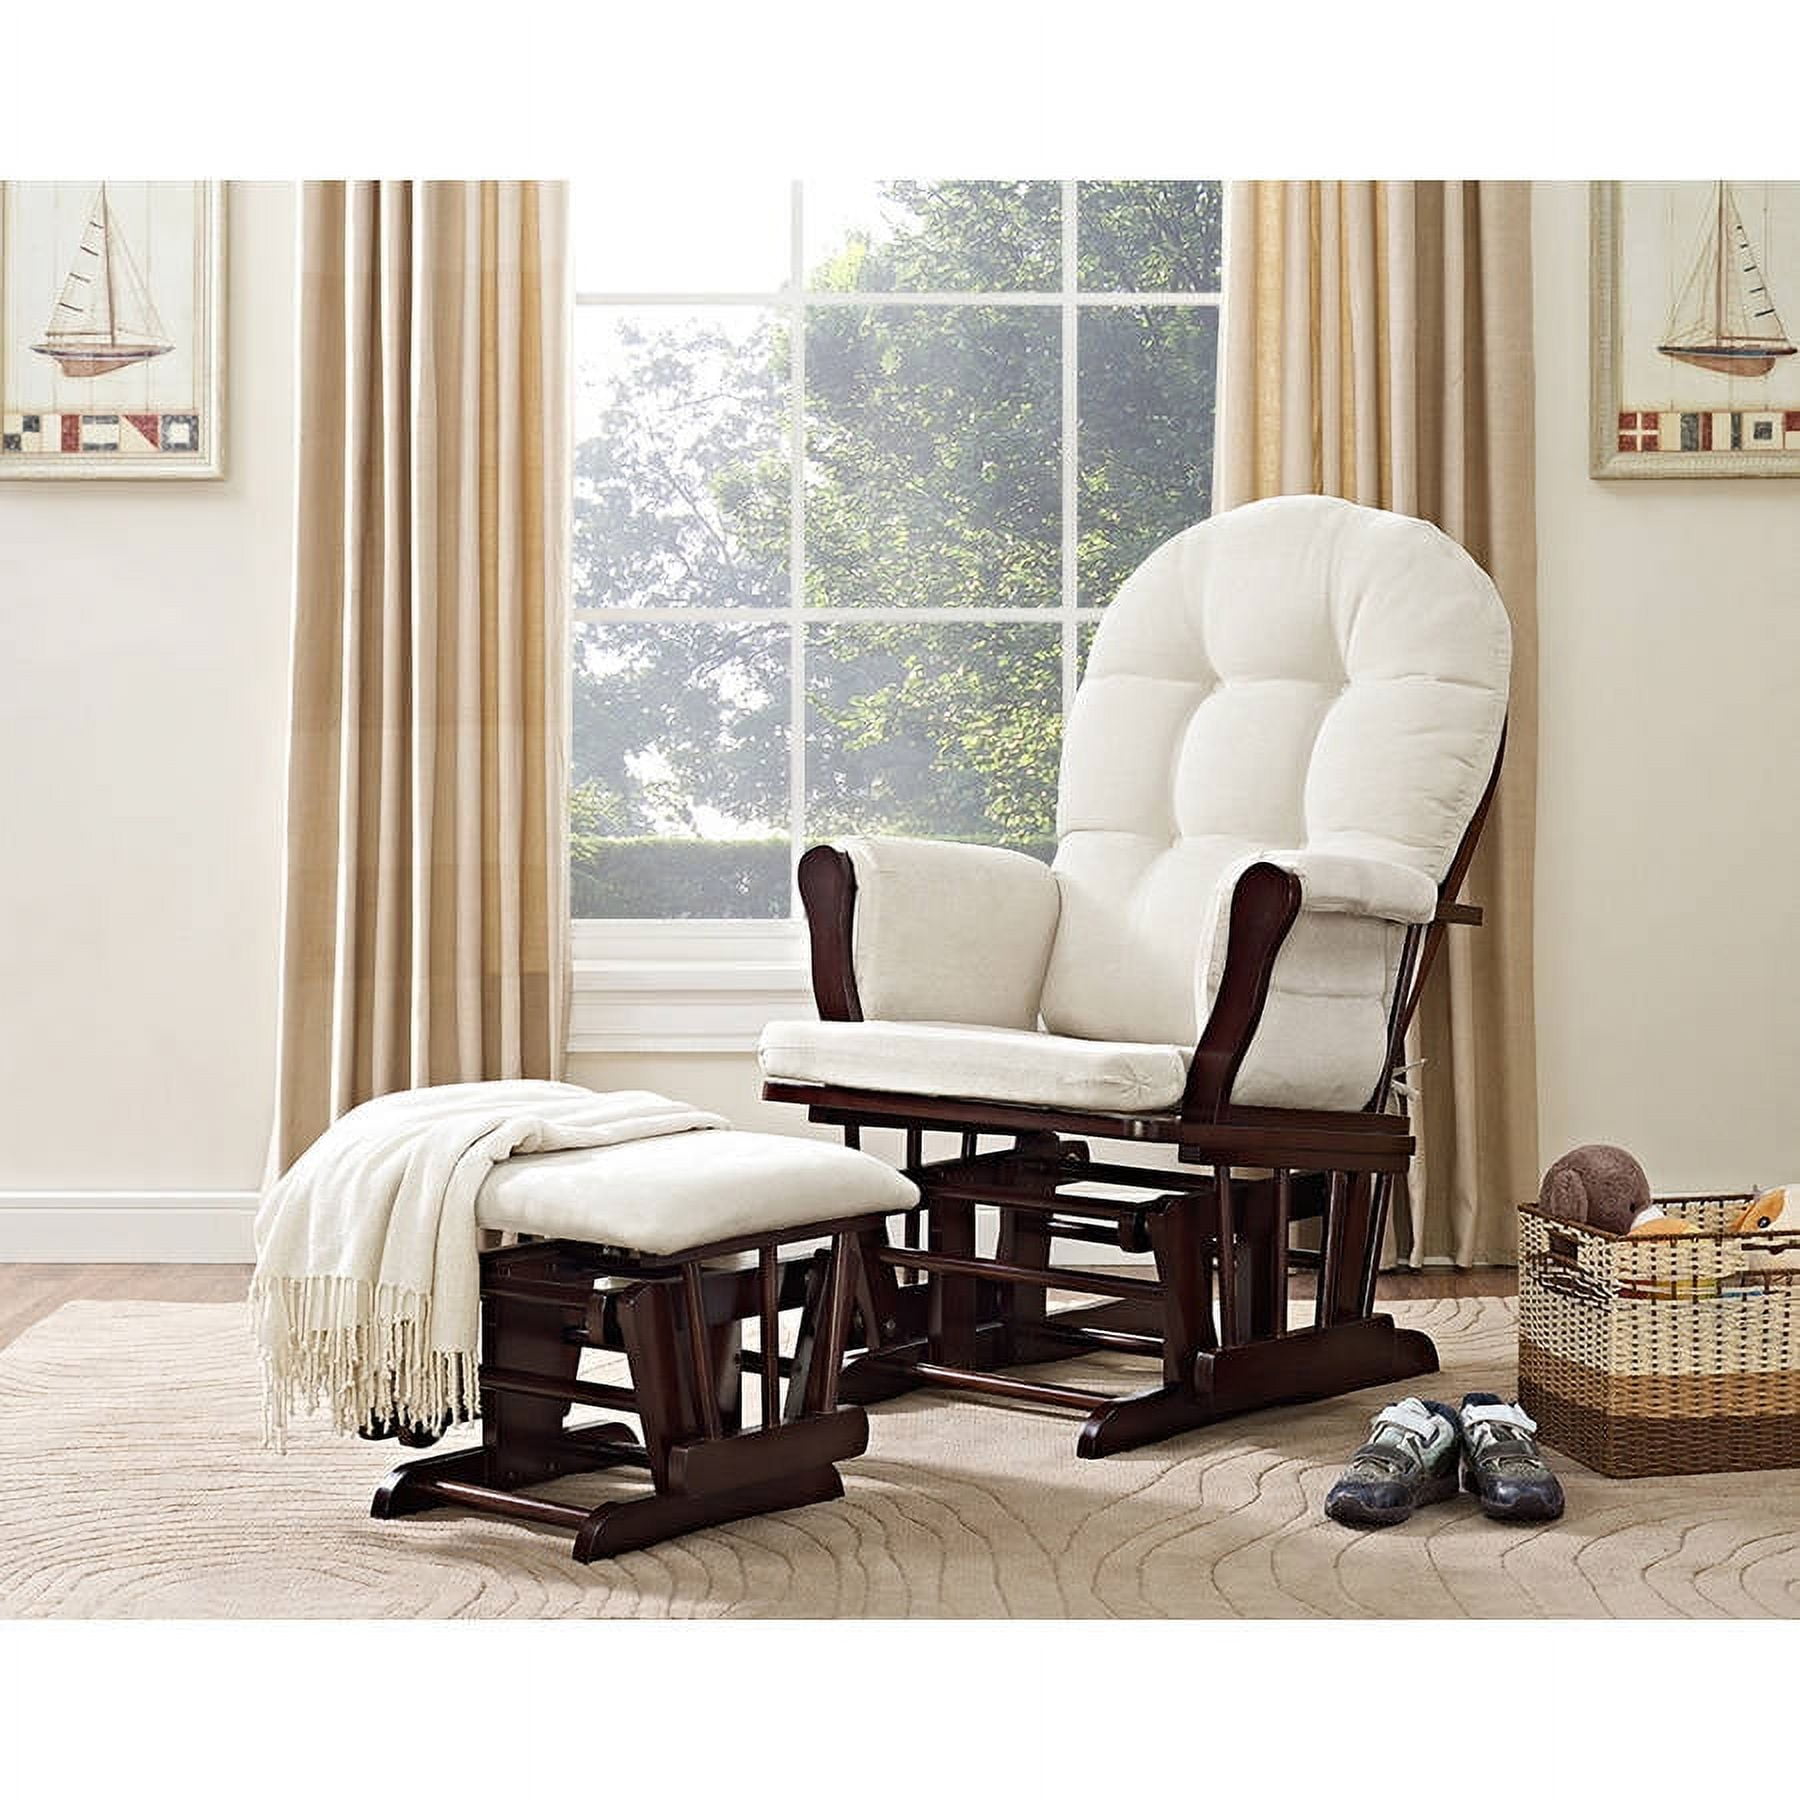 Angel Line Windsor Glider and Ottoman, Espresso Finish with Beige Cushions